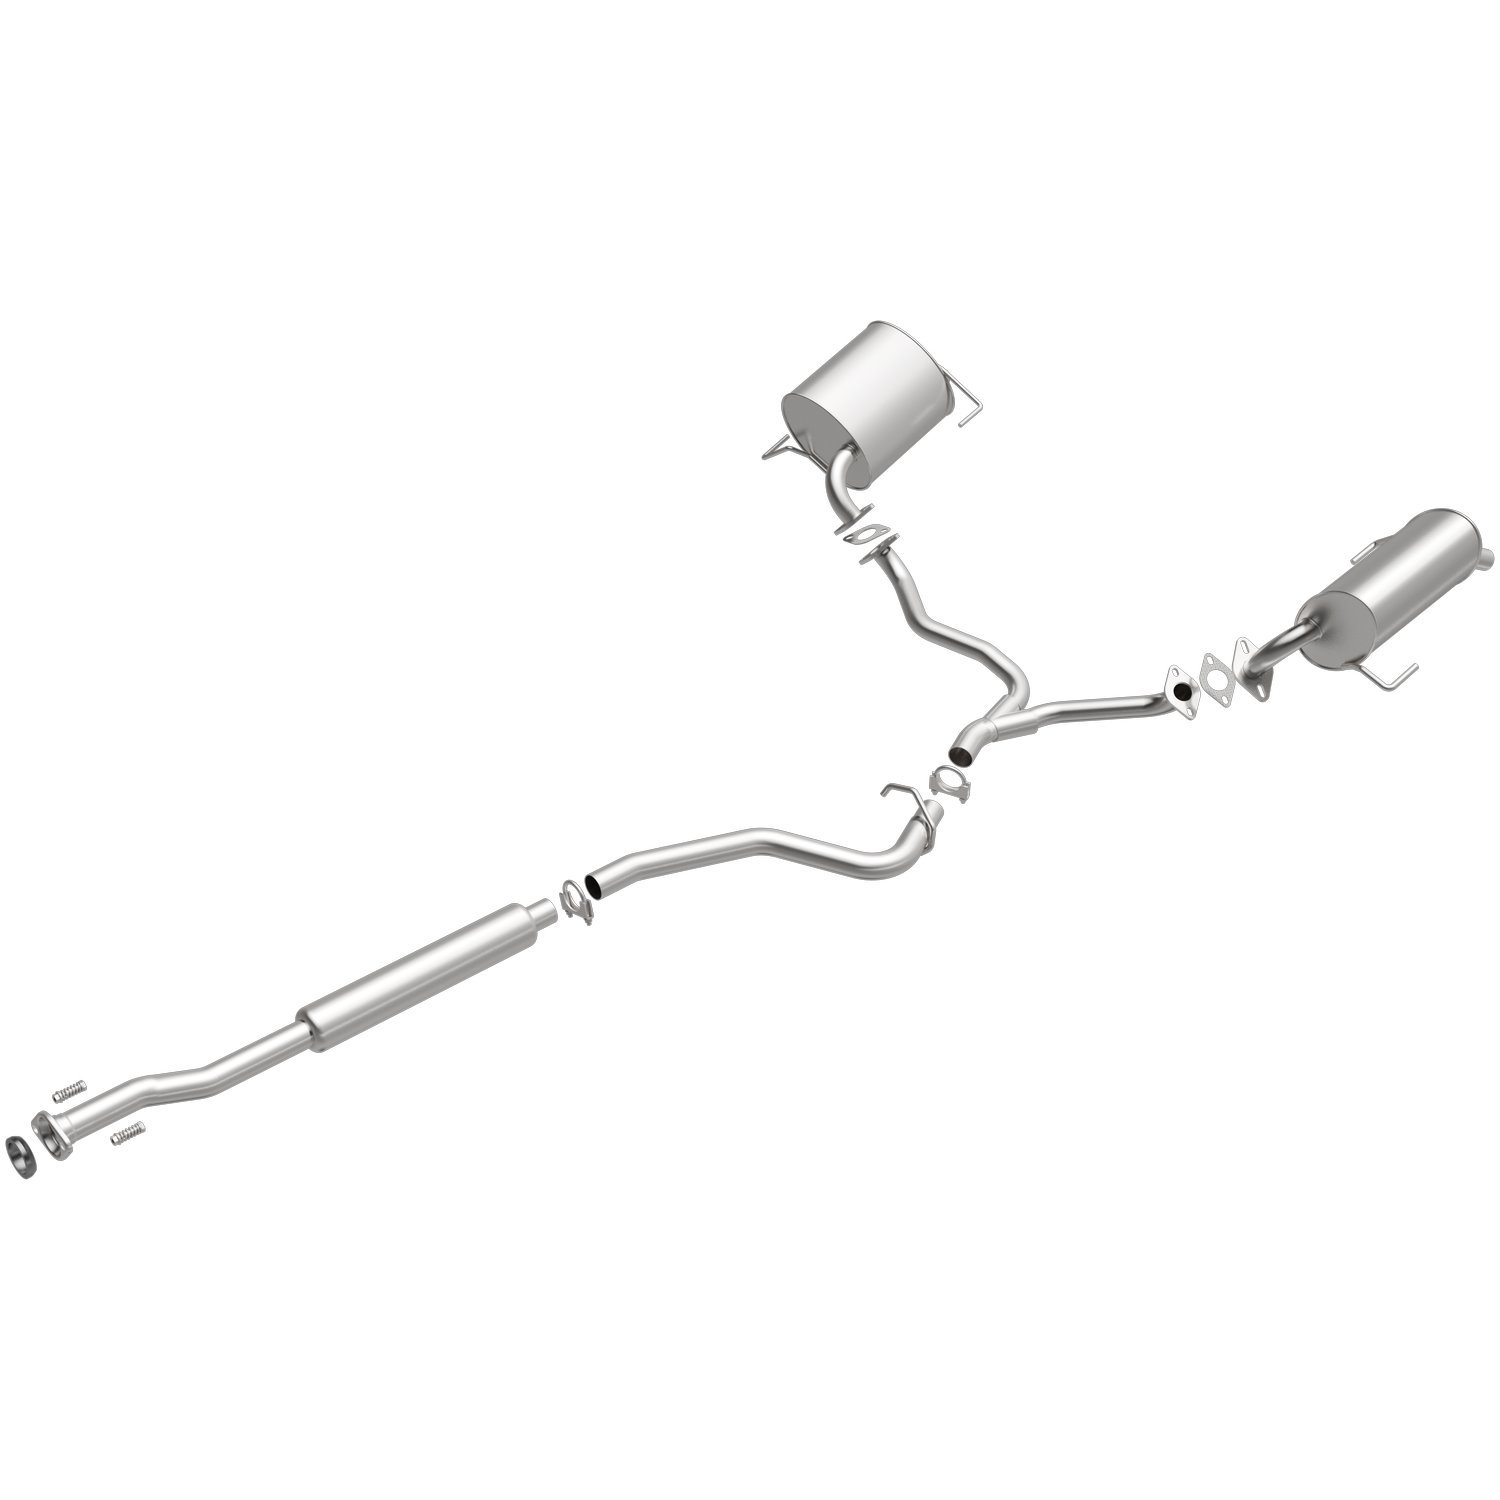 Direct-Fit Exhaust Kit, 2006-2009 Subaru Outback 2.5L